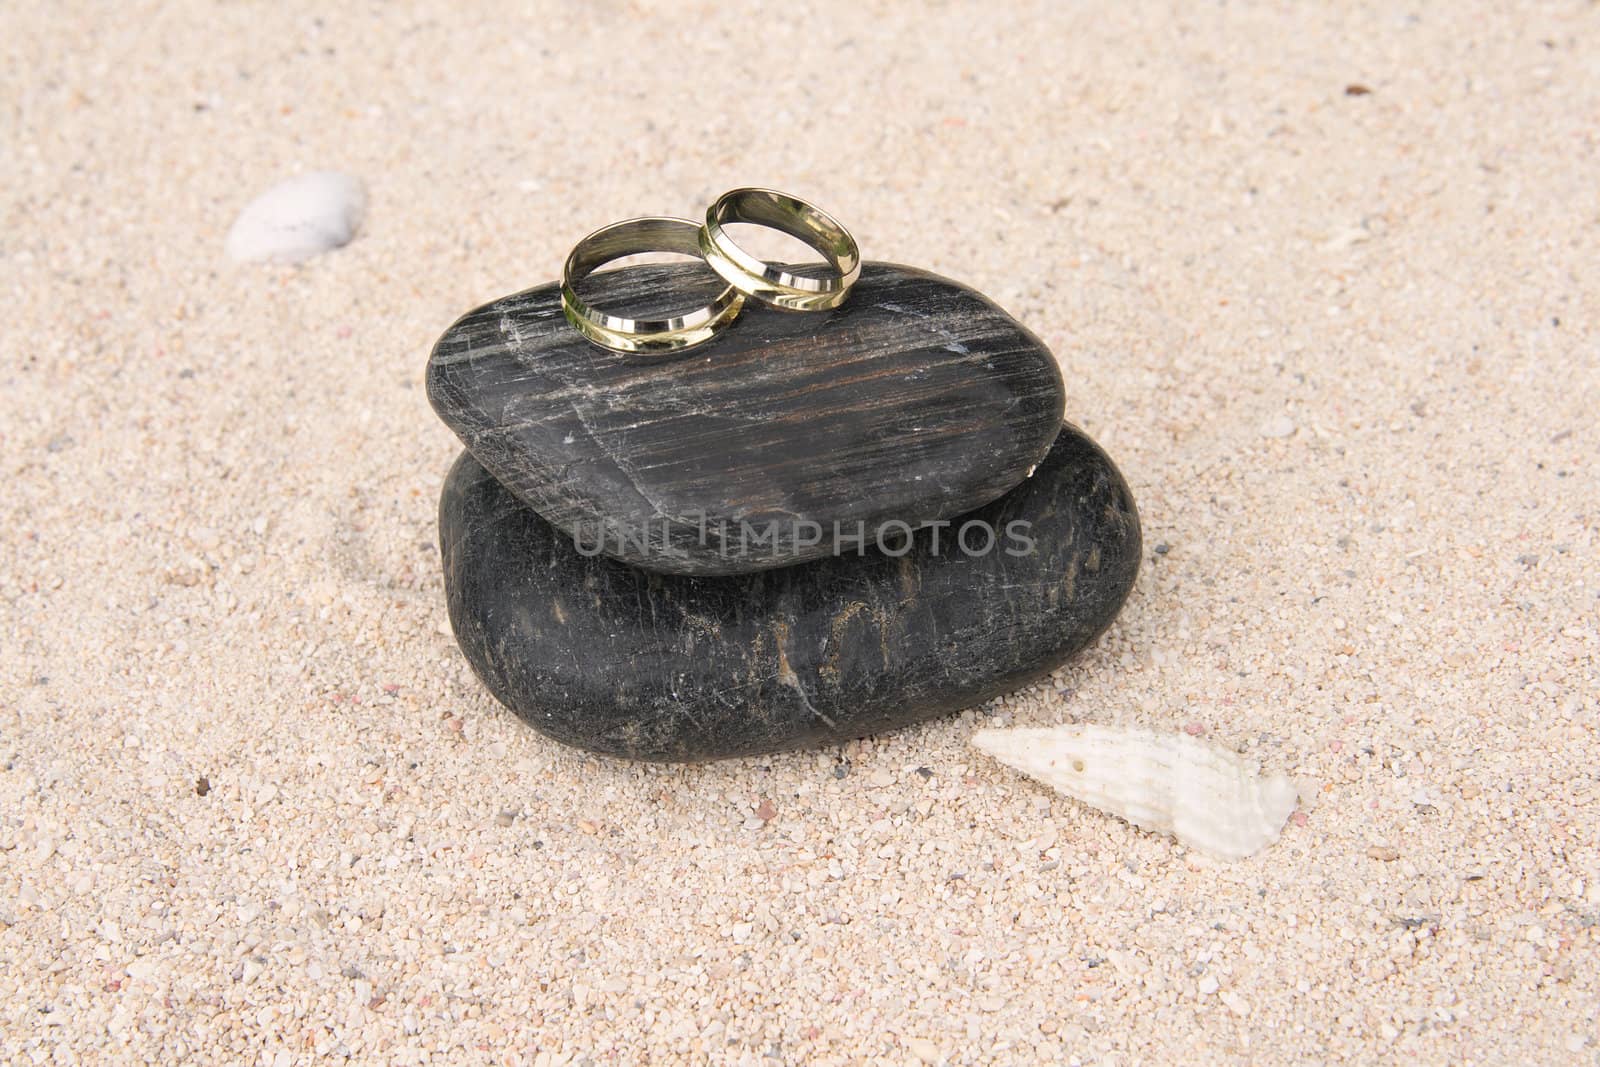 A pair of gold wedding rings placed upon black pebbles on the sand beside a white seashell